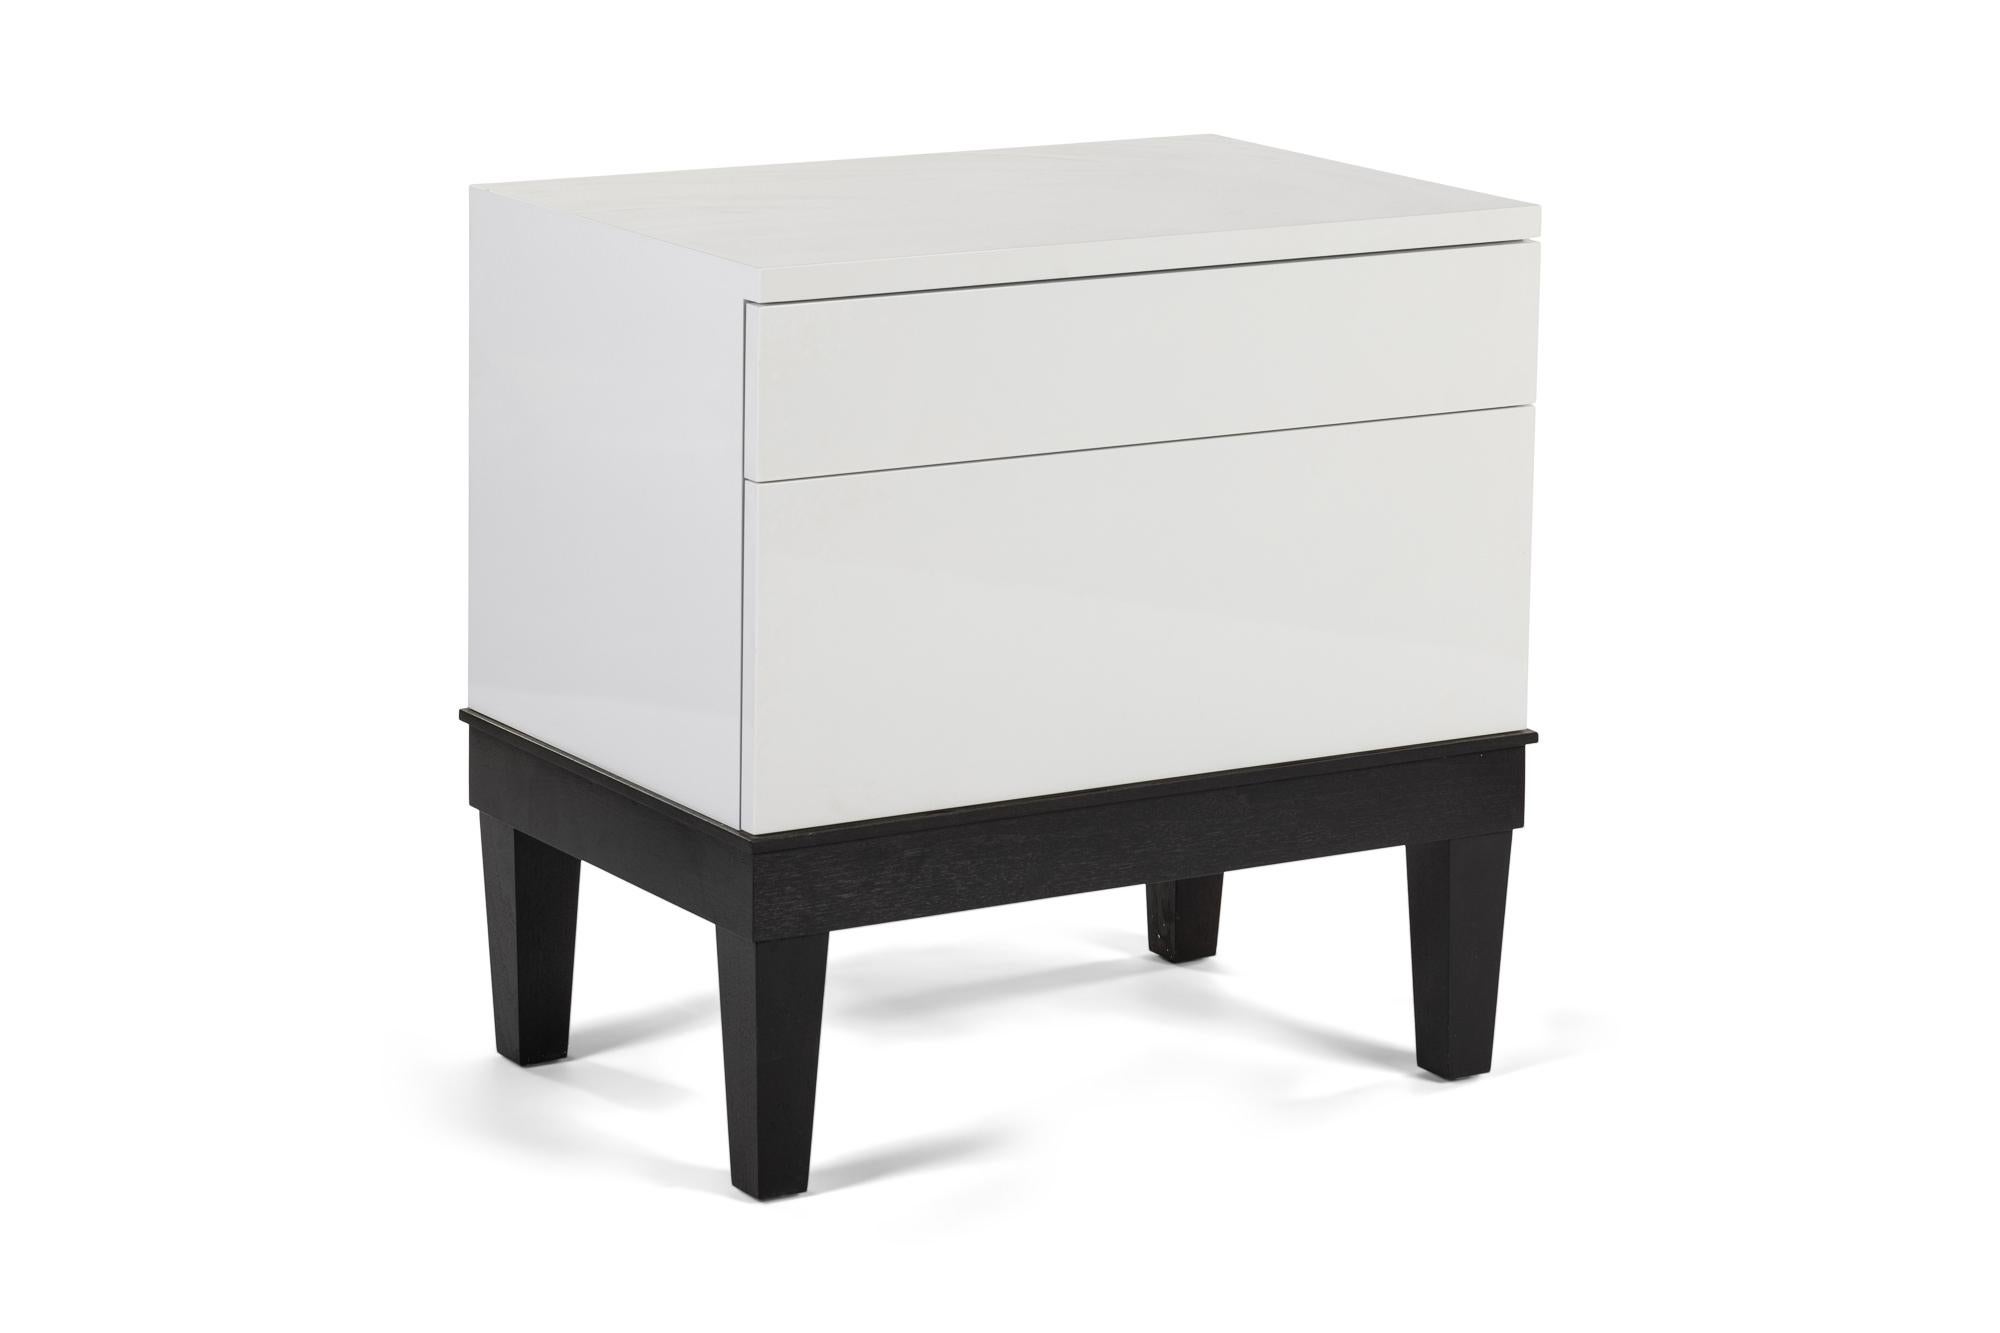 The muse has unique proportions that give it a fun personality. This version of the muse has two touch latch drawers and sits on a condensed base. This elegant storage solution works equally well as a nightstand and side table.

This item is